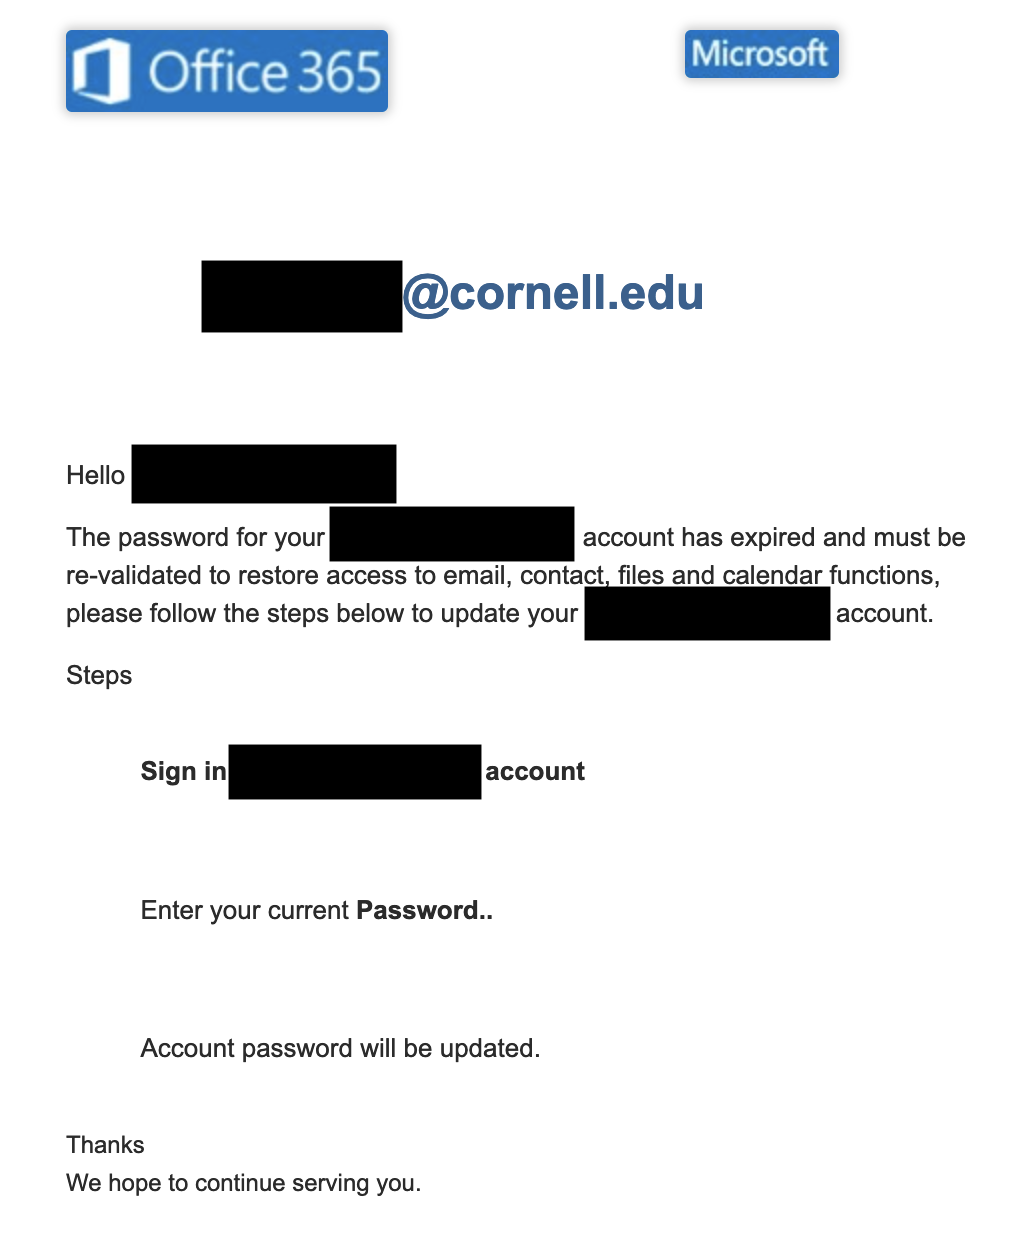 Example of a phishing email